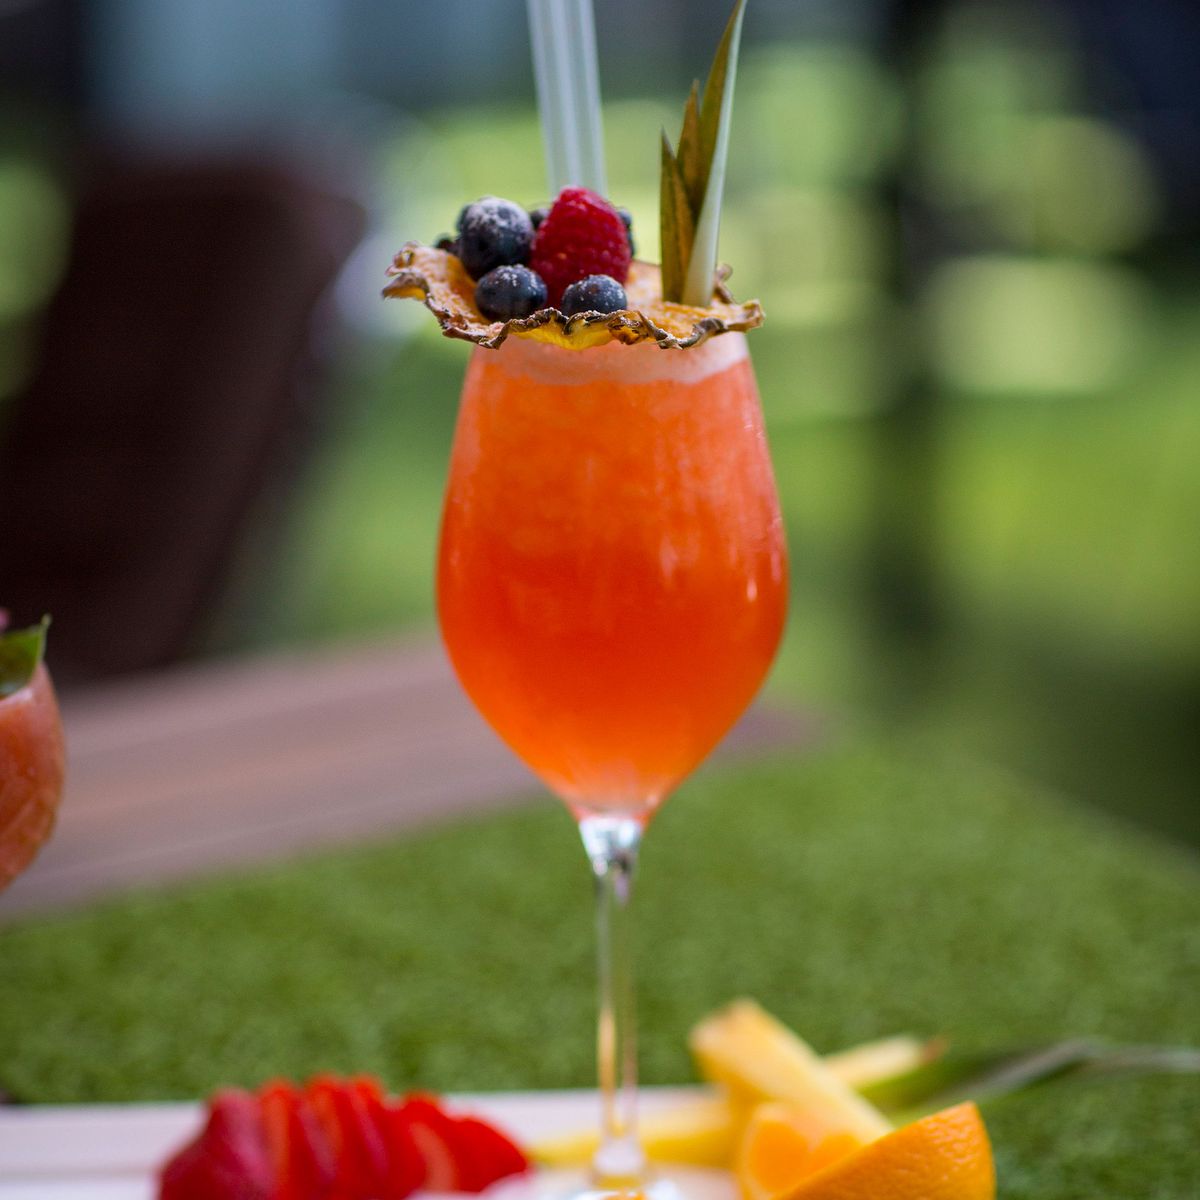 Enjoy the taste of summer with our ginger and goji berry punch